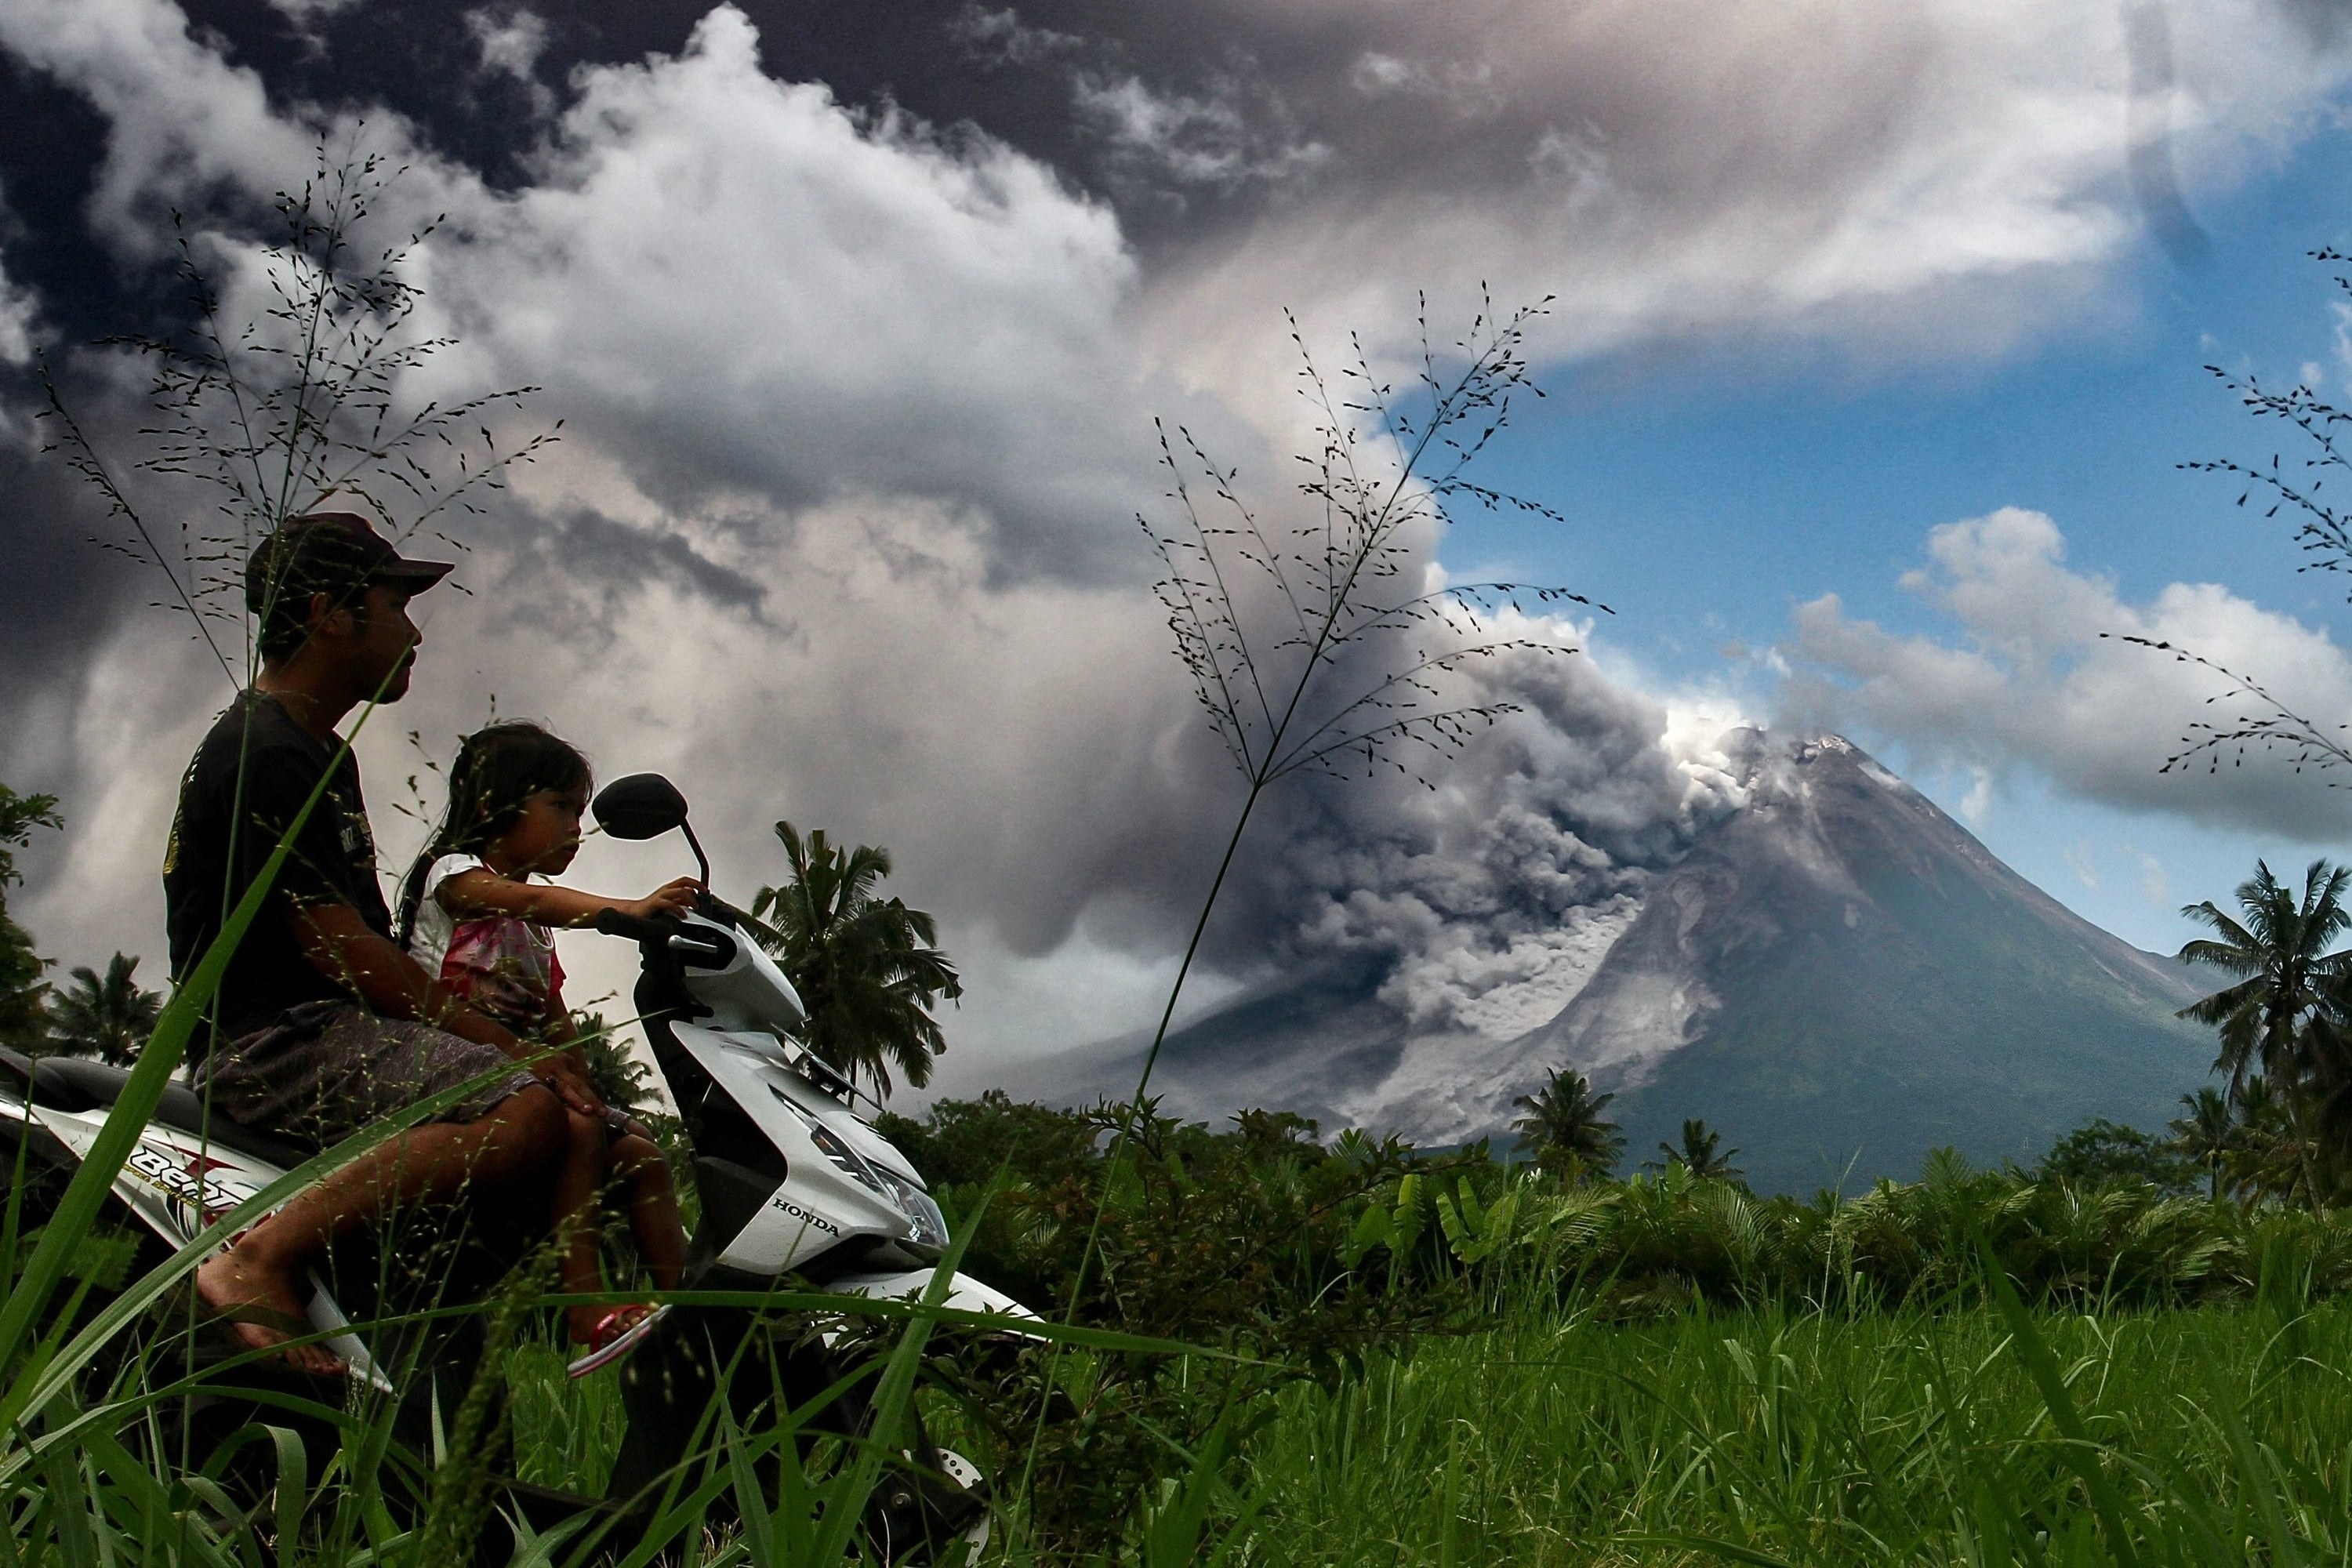 father and young daughter riding a motorbike with a smoking volcano in the background